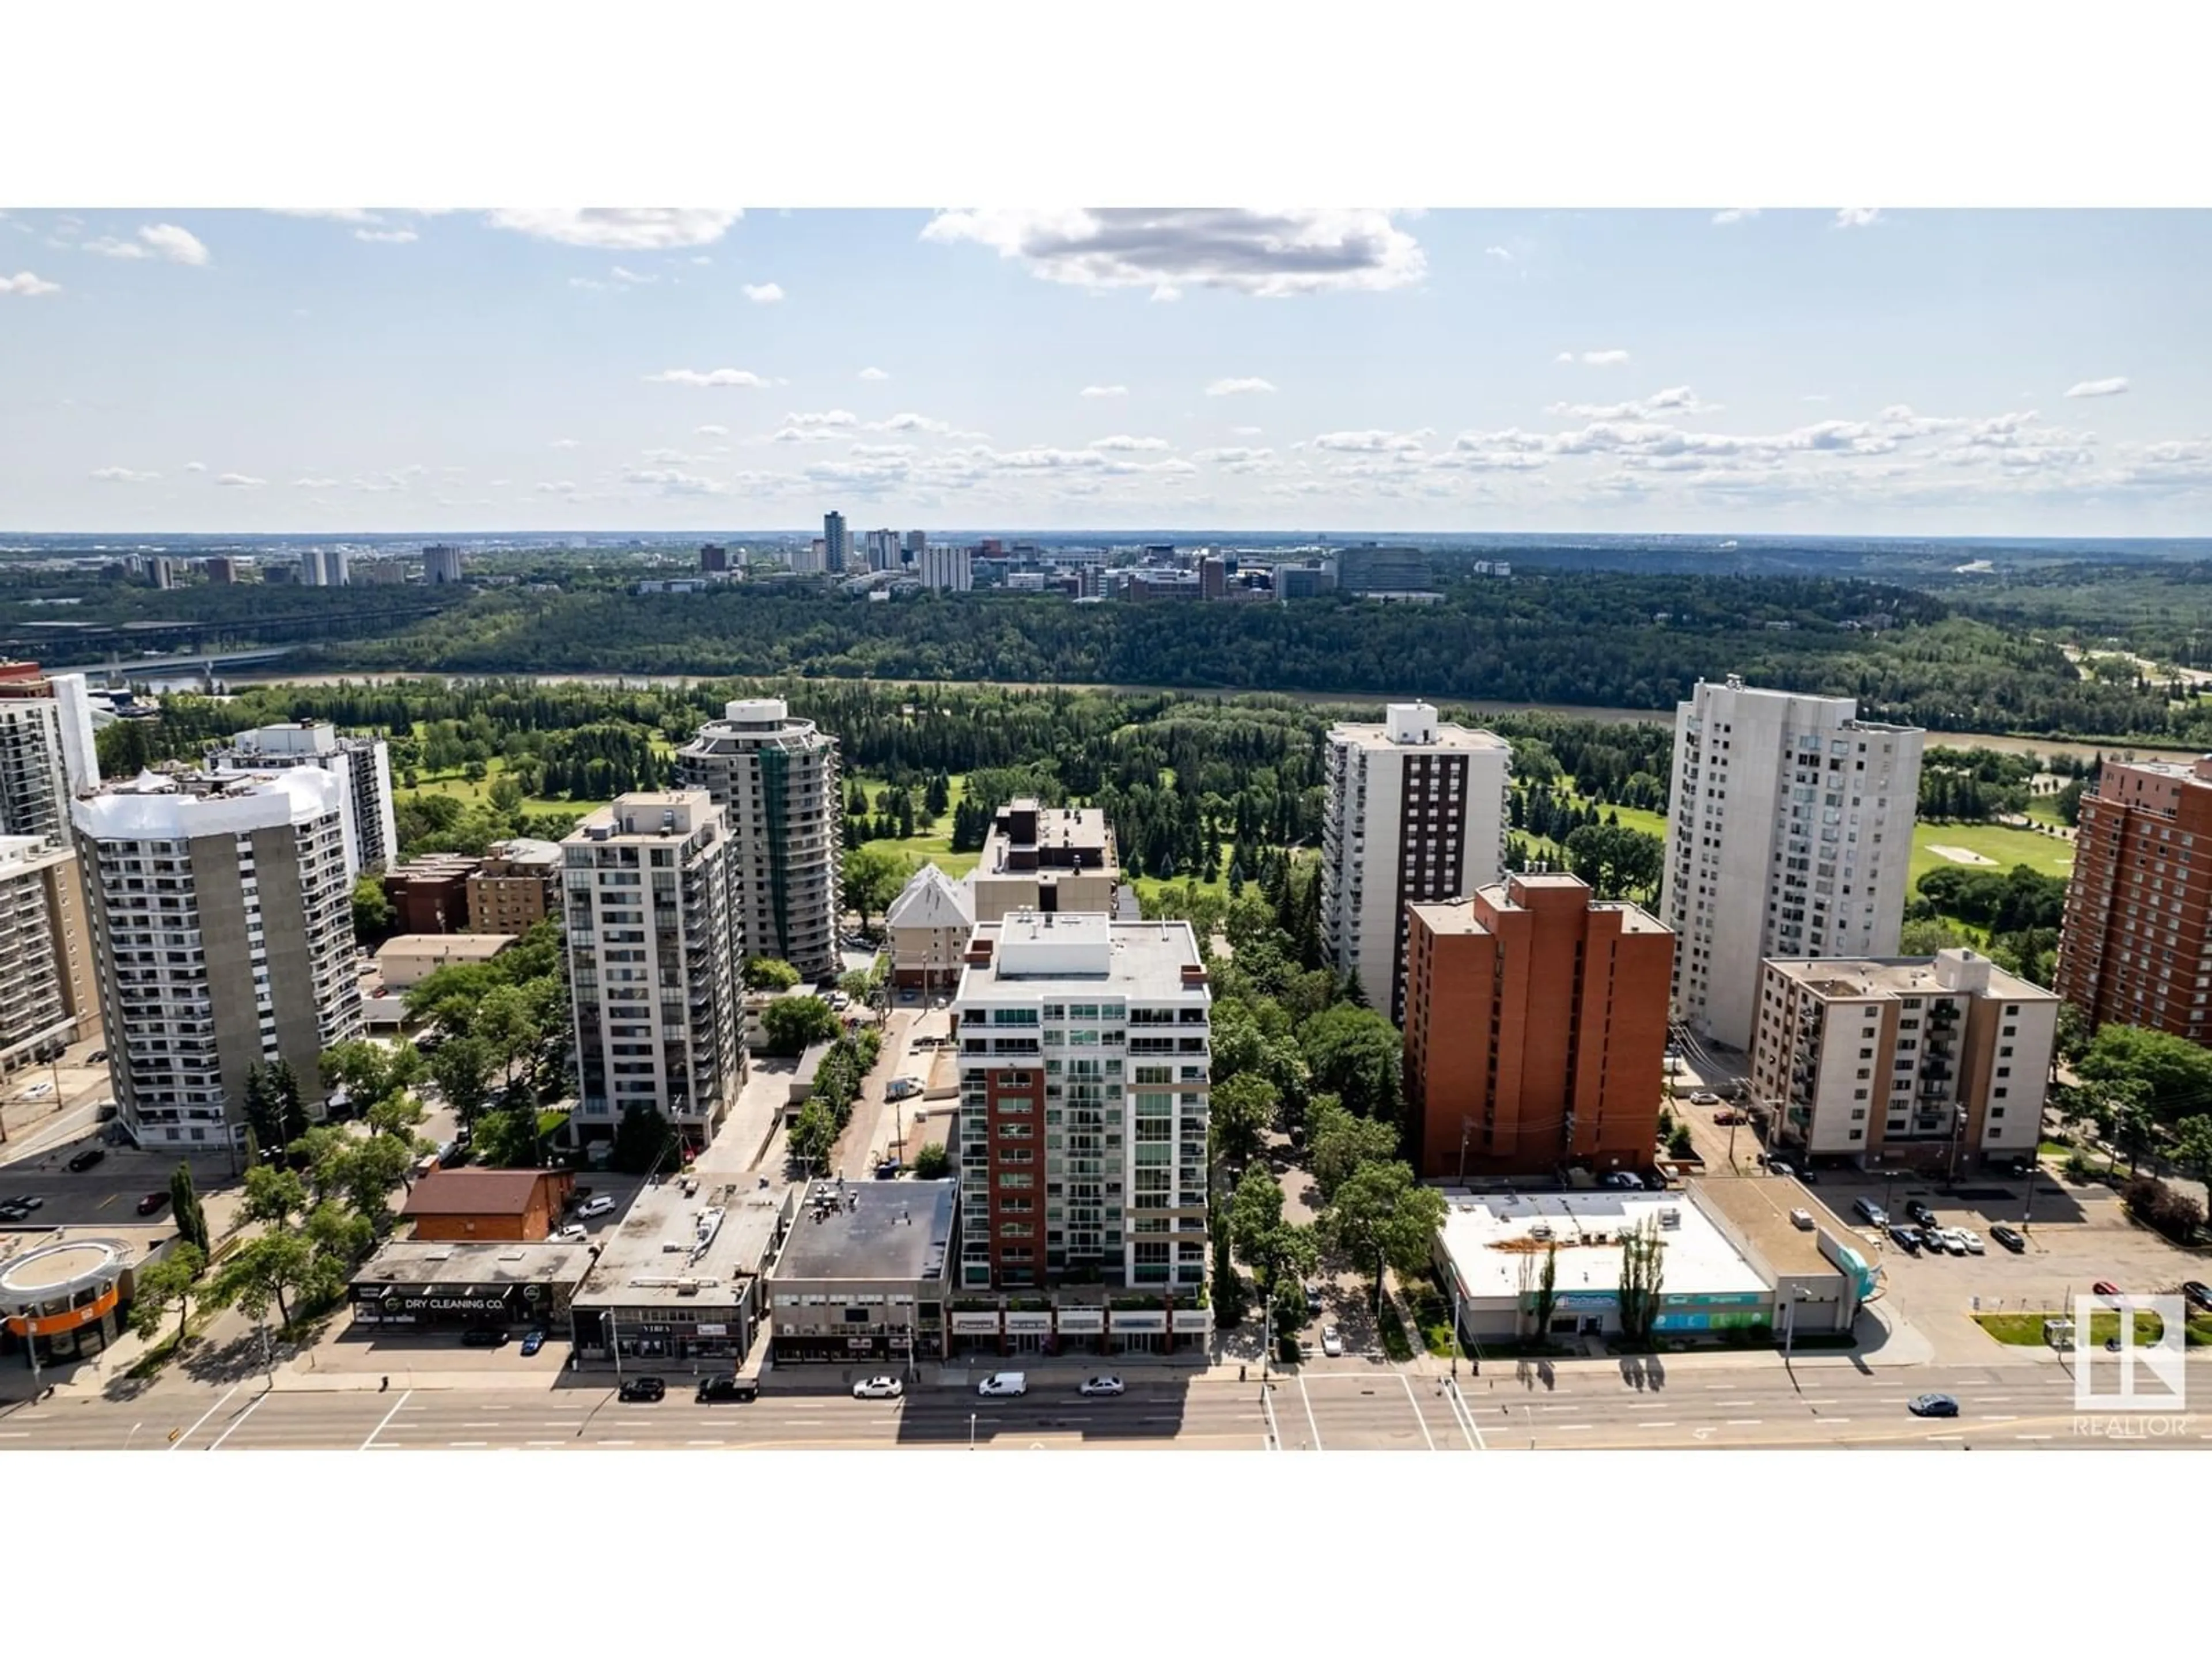 Lakeview for #305 10055 118 ST NW, Edmonton Alberta T5K0C1